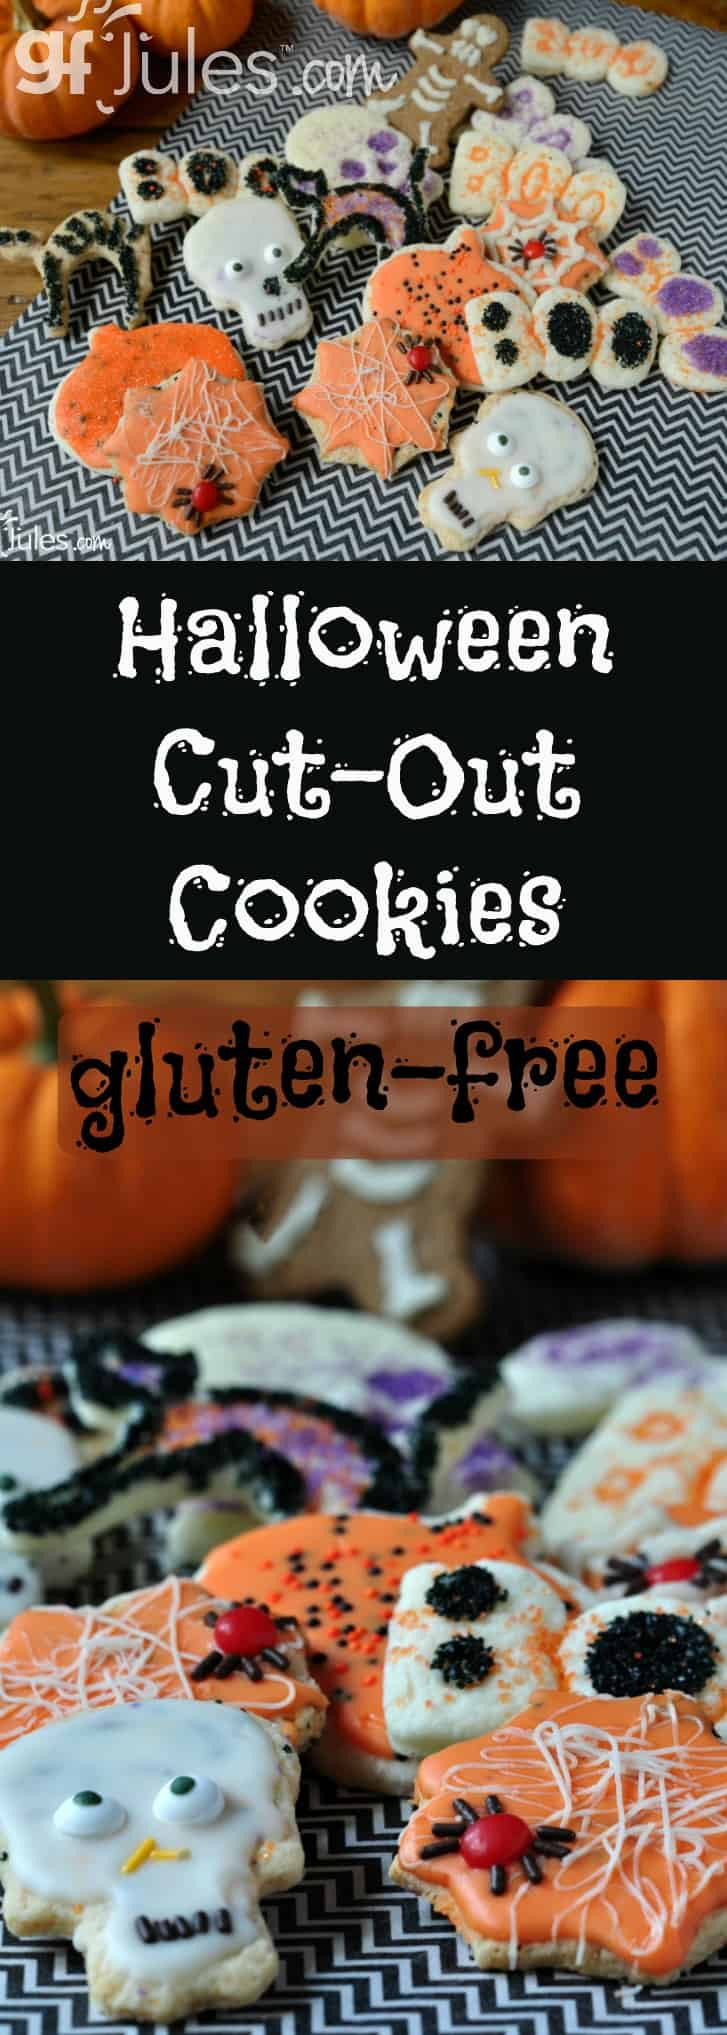 Halloween Cut Out Cookies
 Gluten Free Cut Out Sugar Cookie Recipe from Jules